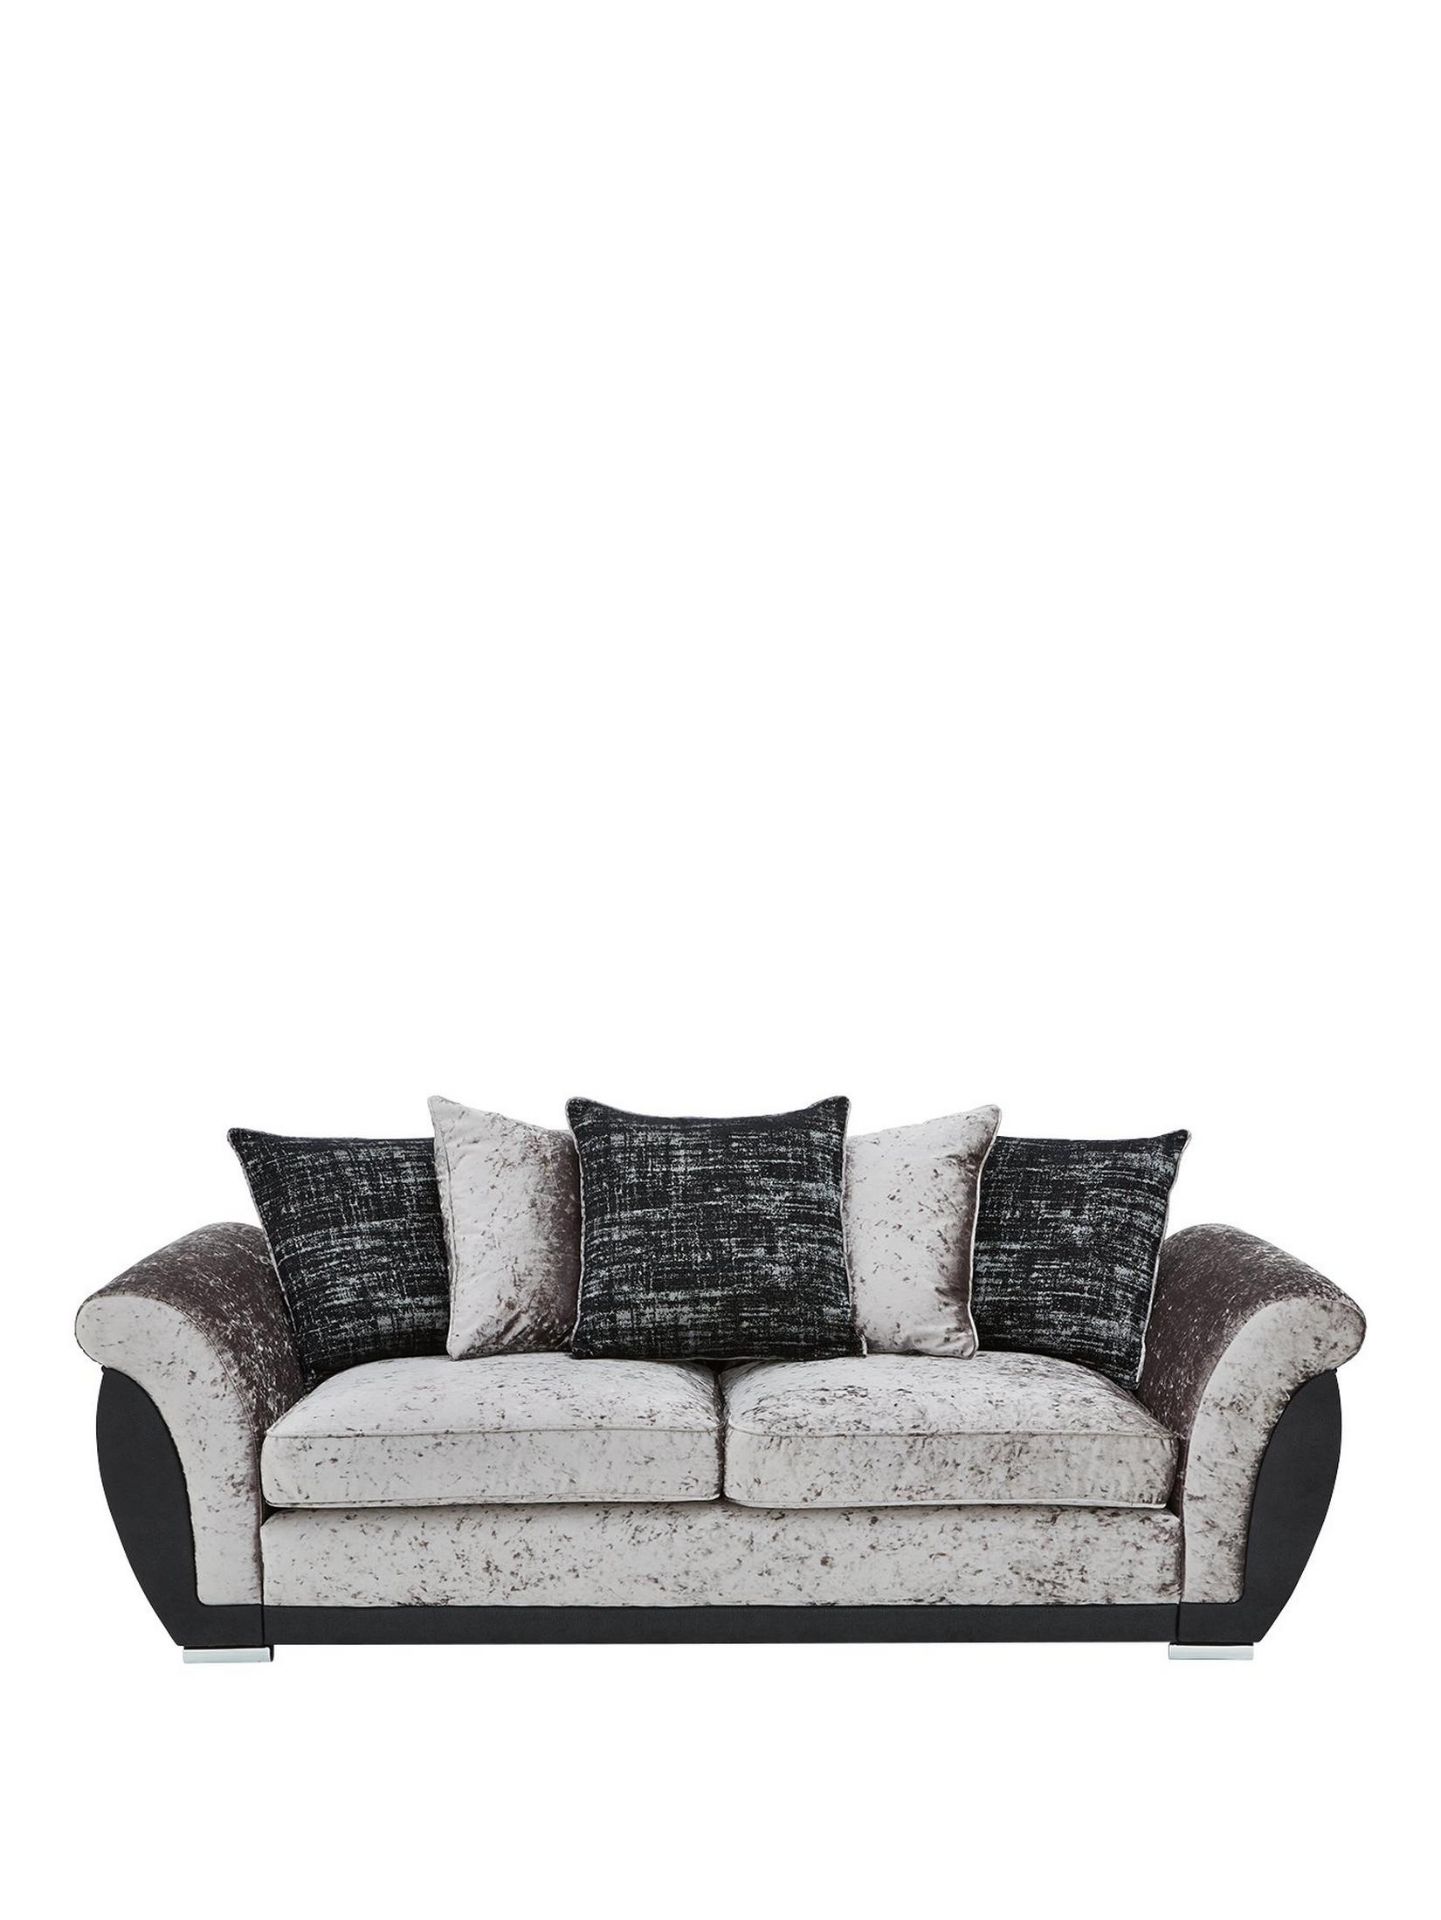 Alexa 3 Seater Sofa. RPP £709.00. H 93 x W 219 x D 95 cm A trio of textures The supple faux - Image 2 of 3